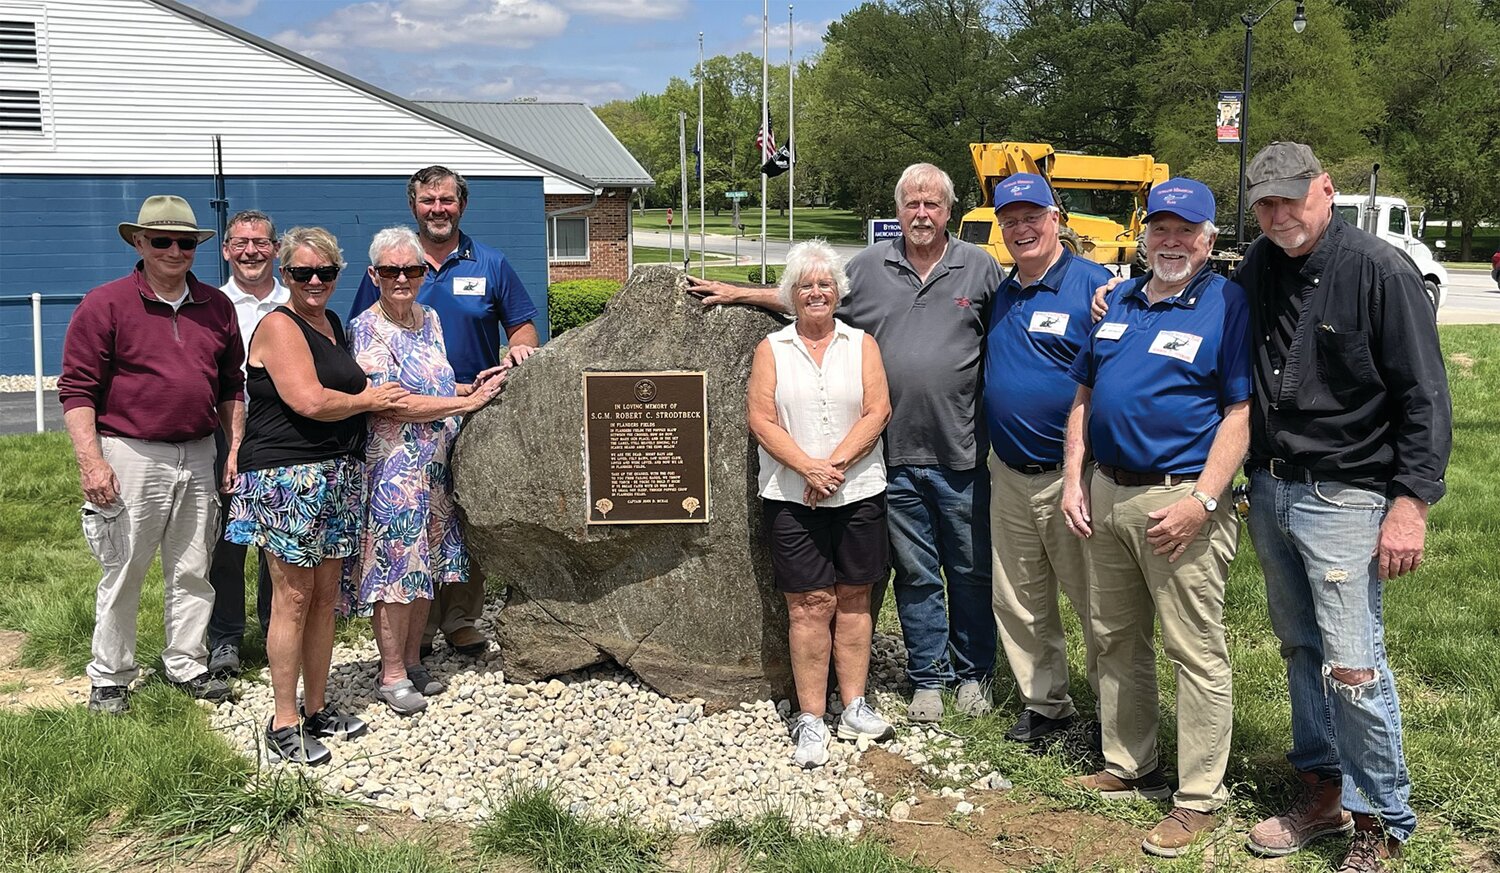 An eight-ton rock with a plaque honoring the memory of World War II and Vietnam War Veteran Robert Strodtbeck was recently installed at Veterans Memorial Park by VMP Advisor Roy Hurt of Craw-Con Inc. and Gail Blackwell of B&L Engineering, who have contributed $10,000 to date through in-kind contributions to the park. It had been on display at a private residence in Greencastle. It was donated by Valerie Abernathy, Geraldine Payne and Linda Larkin, friends of Strodtbeck’s daughter Helen. Pictured are VMP board secretary Bill Durbin, VMP board member John Douglas, donors Valerie Abernathy and Geraldine Pain, VMP board president Kevin Cobb, donor Linda Larkin, equipment operator Gail Blackwell, VMP board advisor Mark Eutsler, VMP board vice president Mike Spencer and VMP advisor Roy Hurt. VMP is organized as a not-for-profit corporation and is recognized as tax-exempt by the IRS under Section 501(c)(3). Its mission is “Honoring All Veterans.” Various parts of the park and its operation are available for sponsorship and underwriting, including purchasing bricks that will surround the center monument. Engraved bricks will recognize veterans and those who support veterans. More information is available on the park’s Facebook page — Veterans Memorial Park – Crawfordsville.